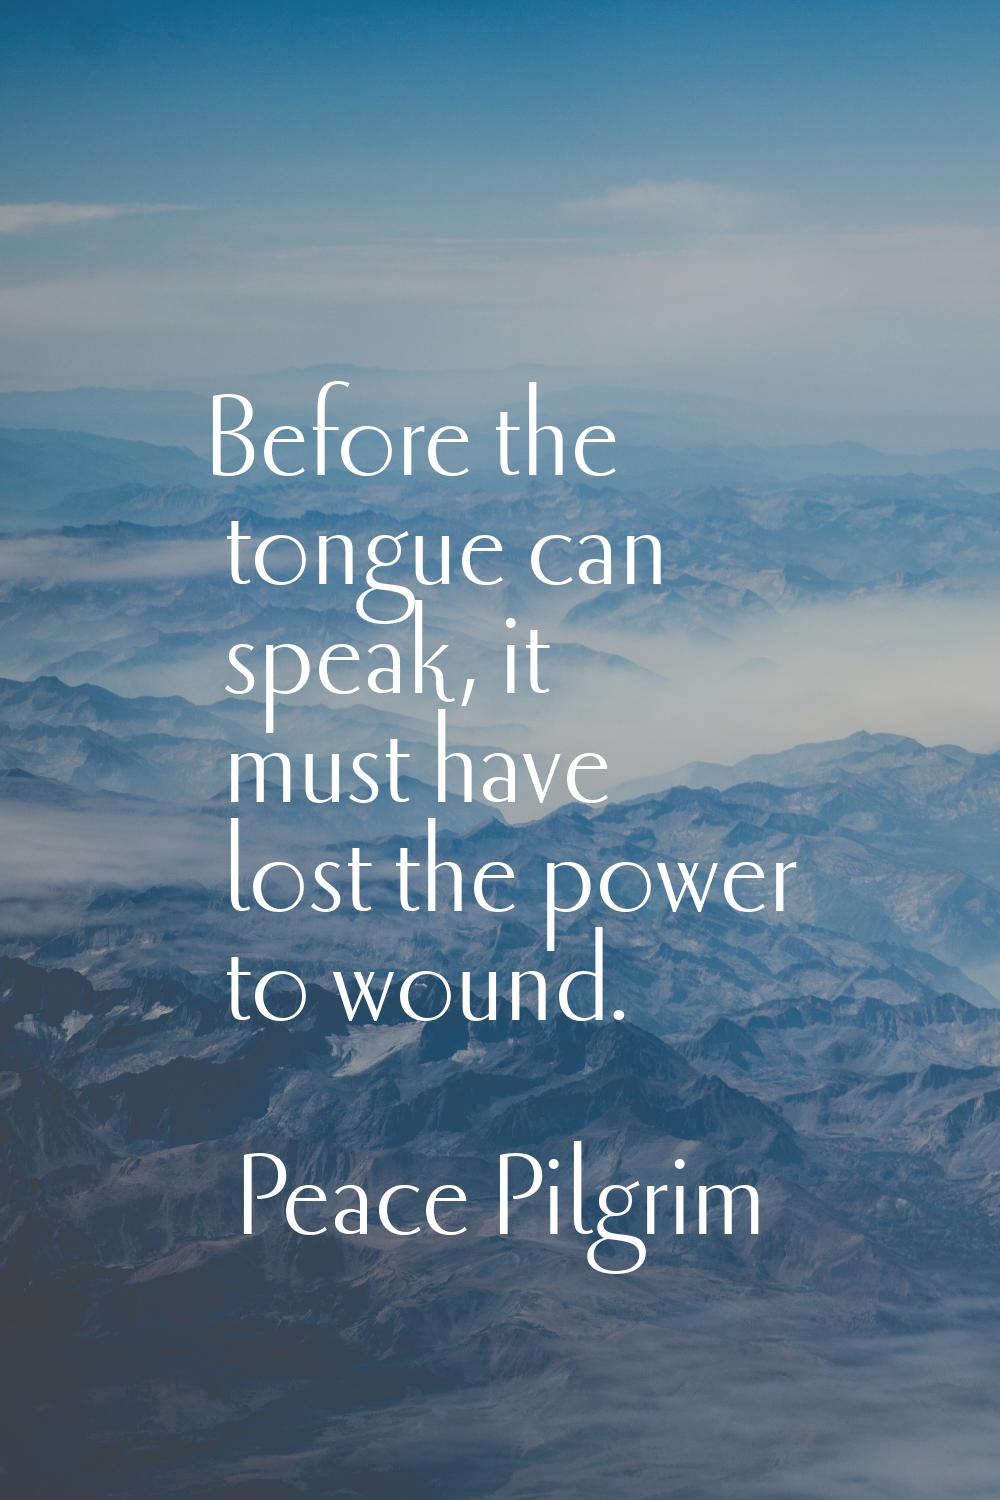 Before the tongue can speak, it must have lost the power to wound.